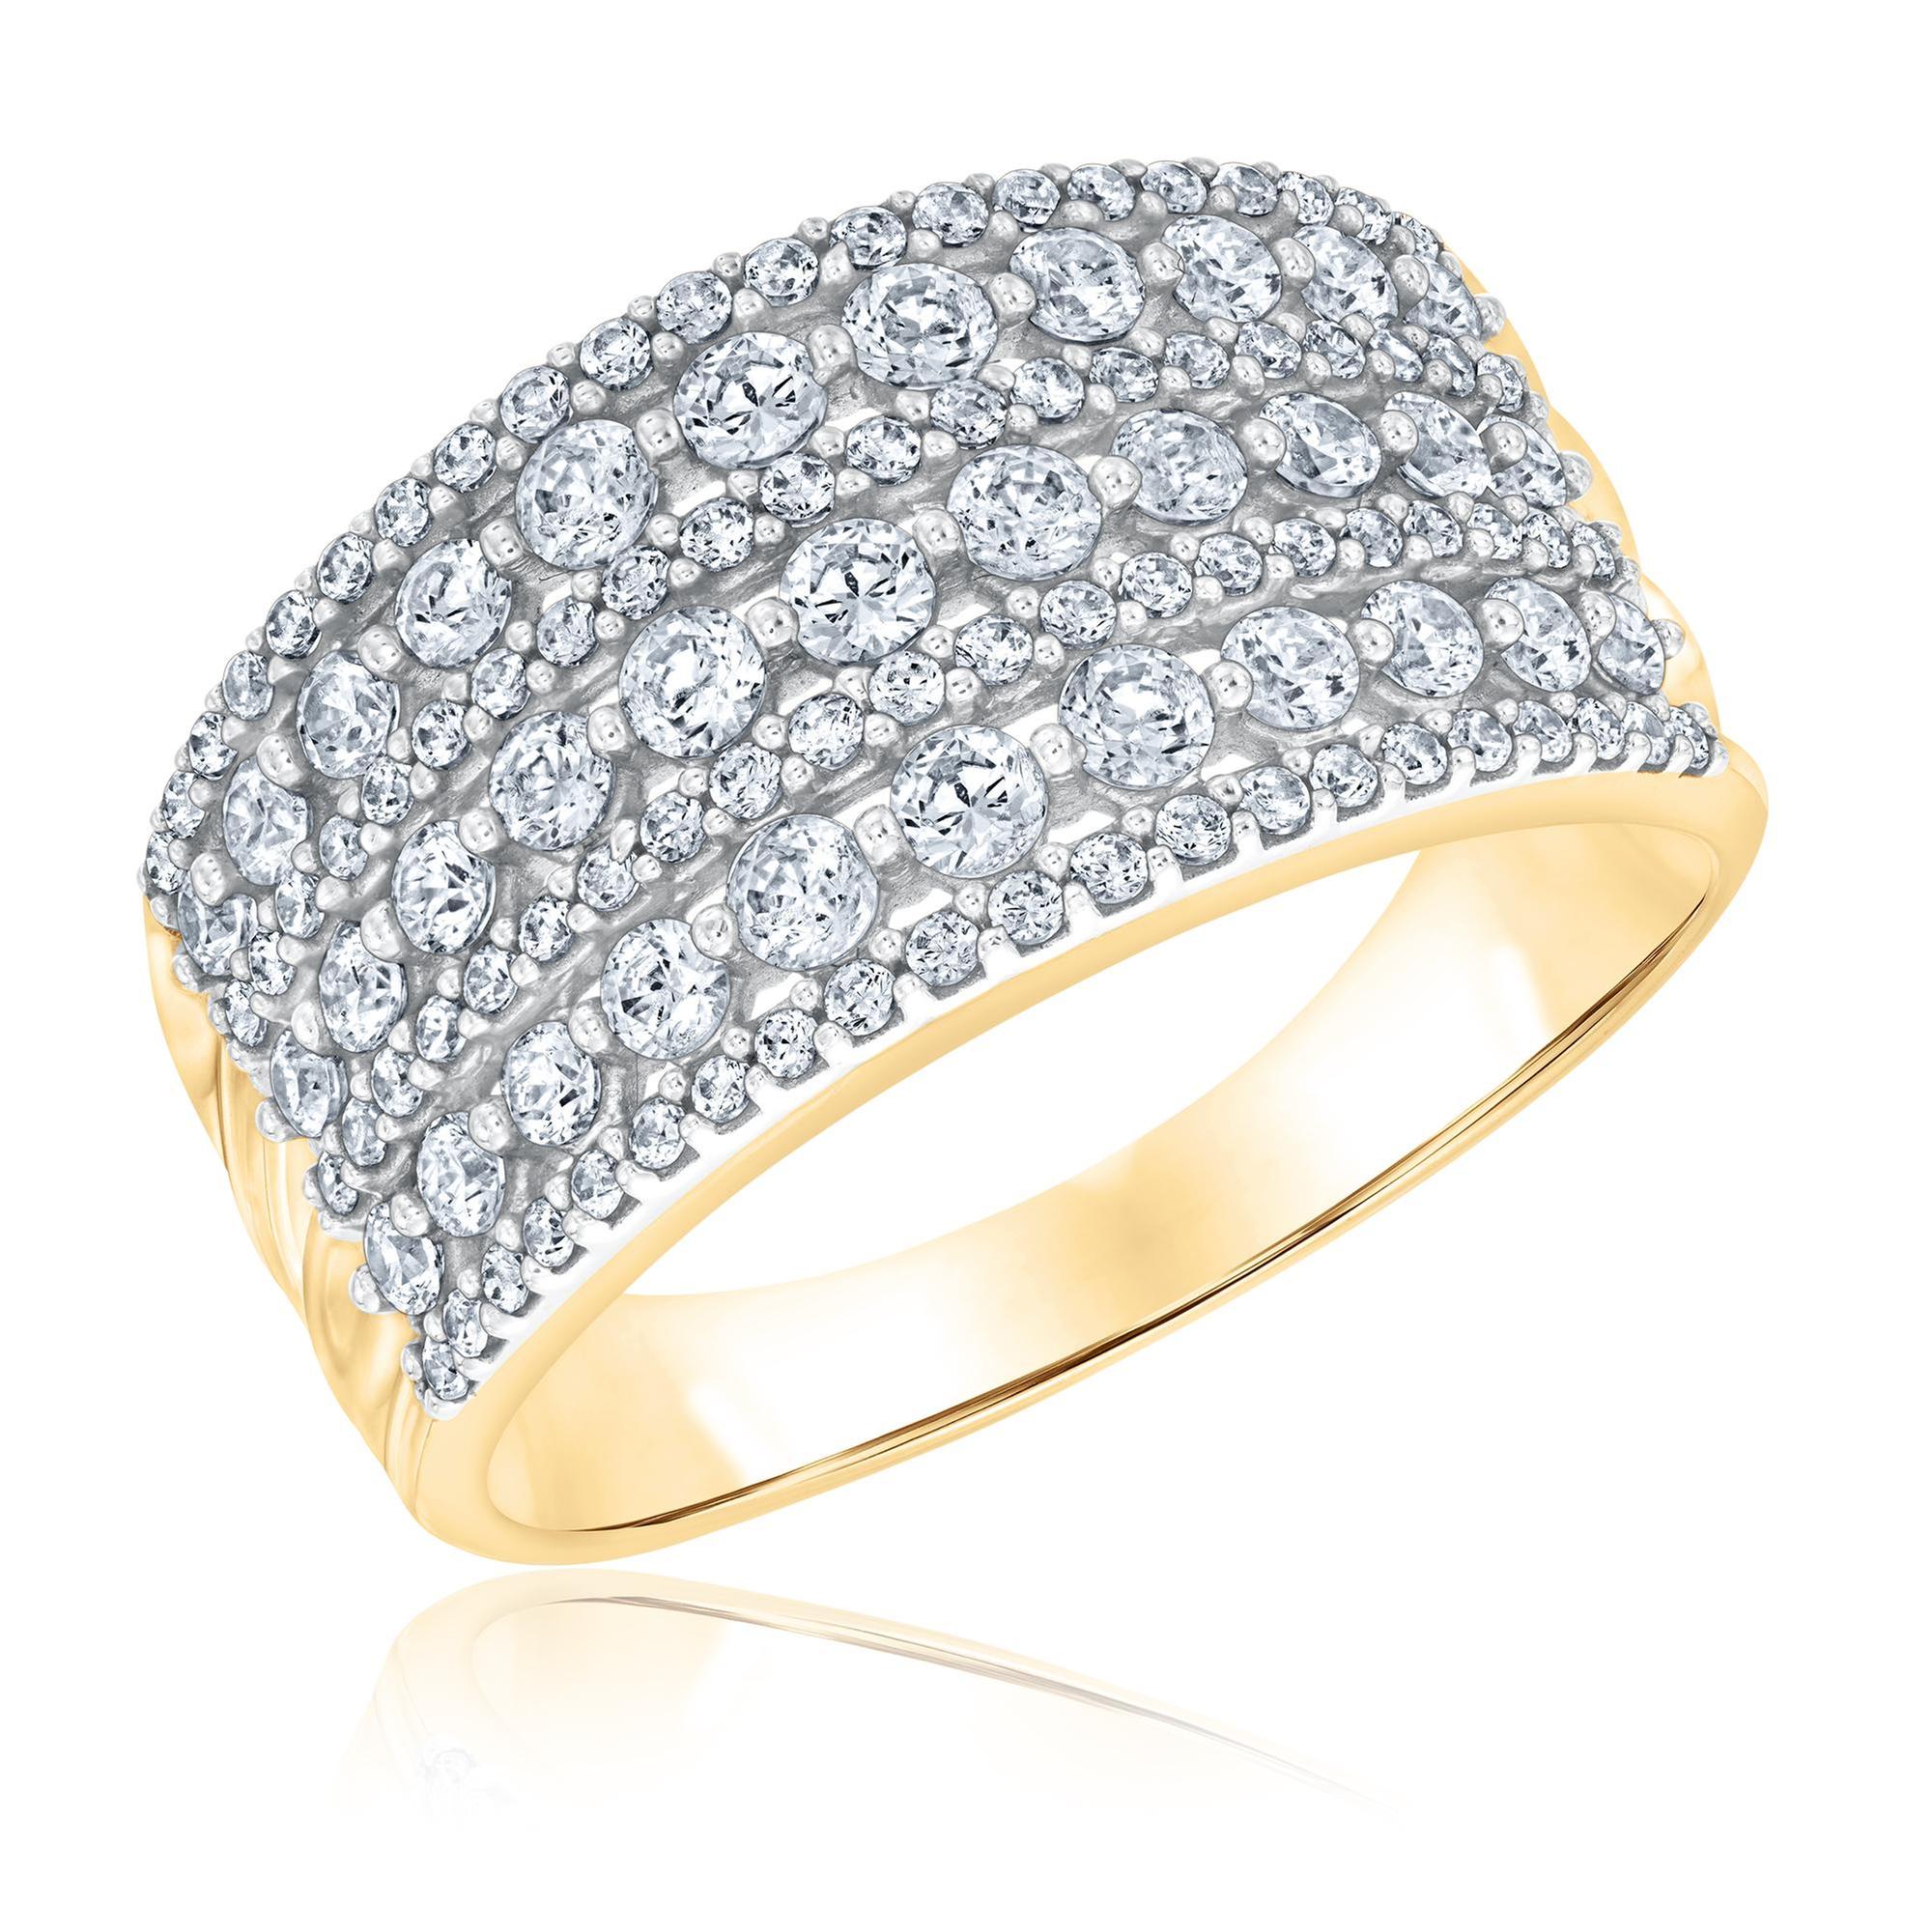 Details about   0.25Ct Round Cut White Diamond 14K White Gold Over Anniversary Band Guard Ring